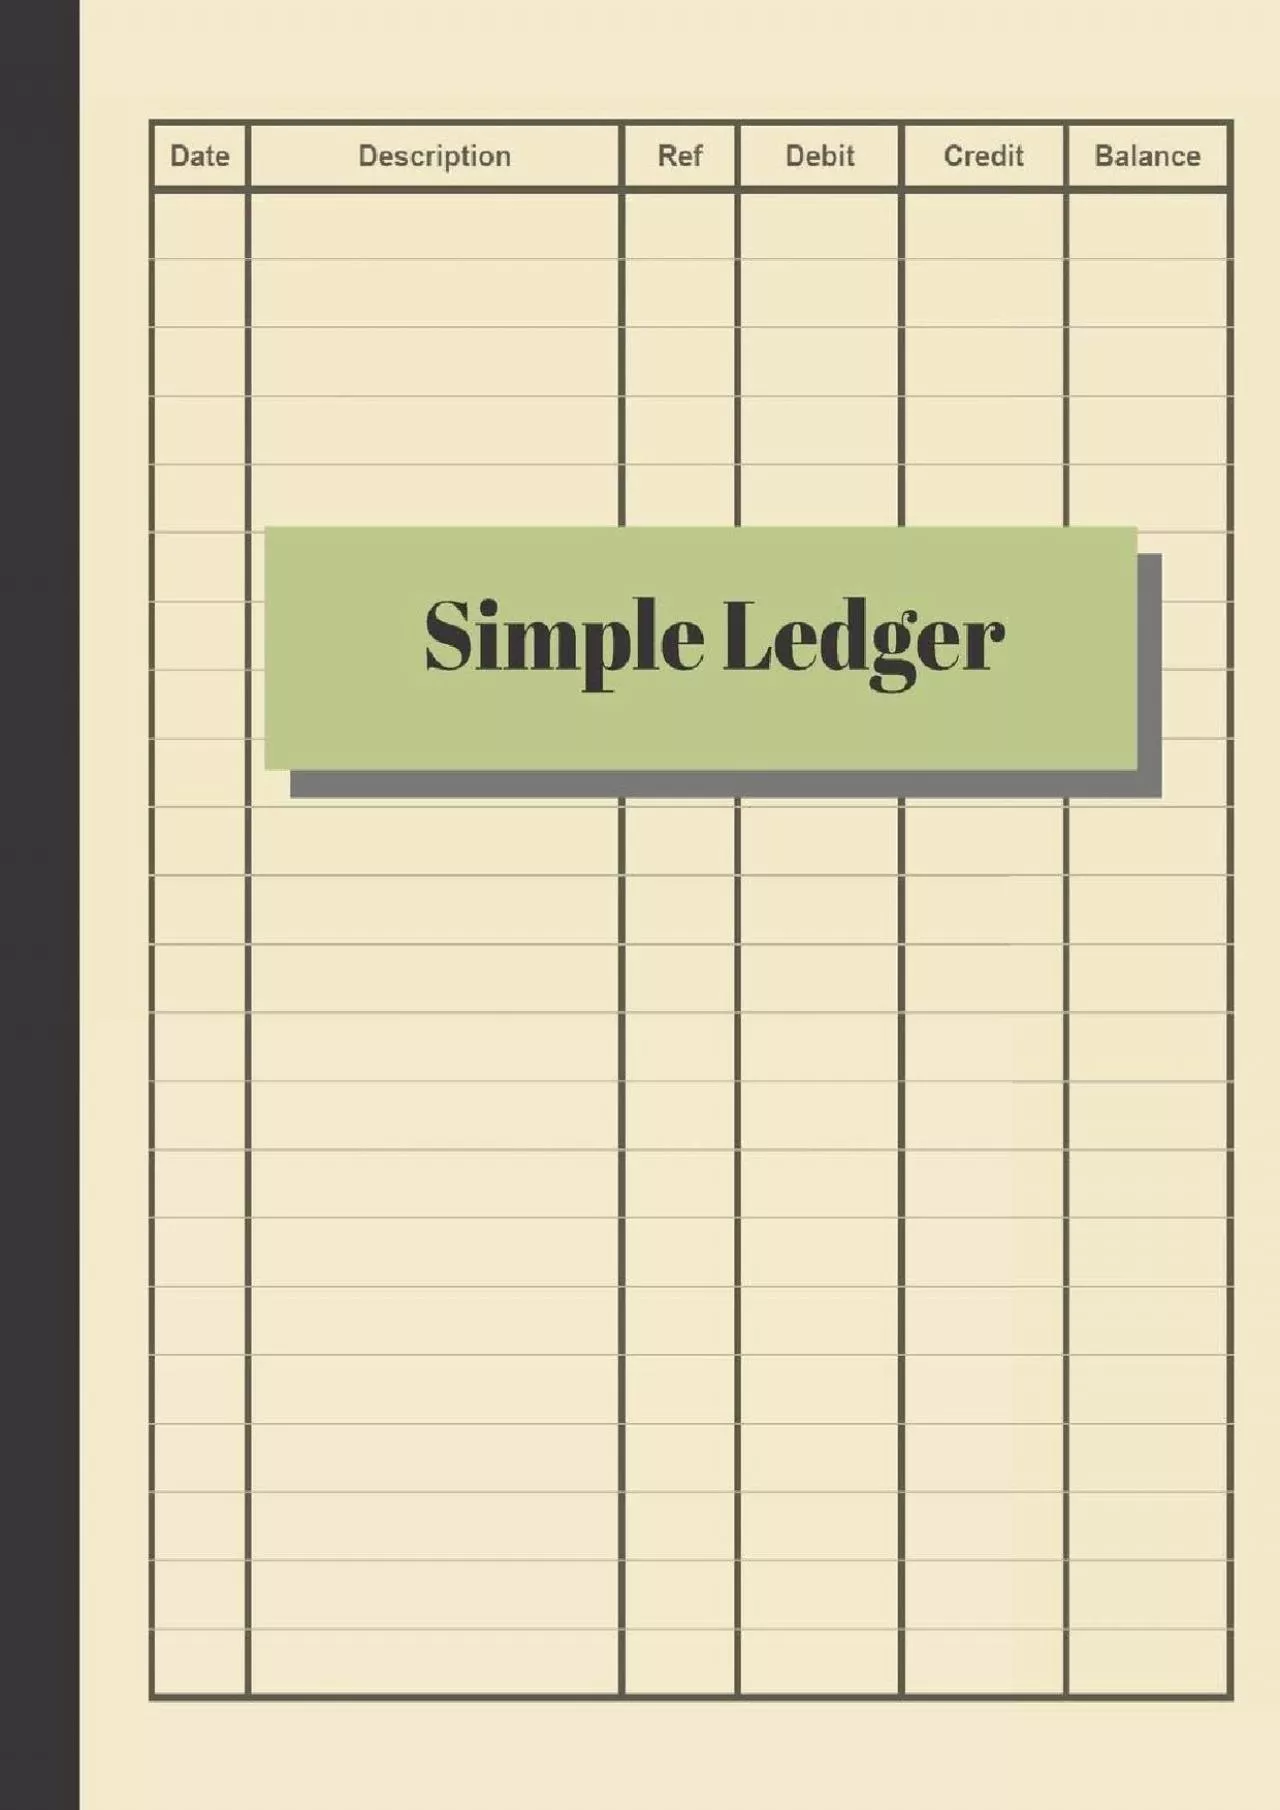 (BOOK)-Simple Ledger: Cash Book Accounts Bookkeeping Journal for Small Business | 120